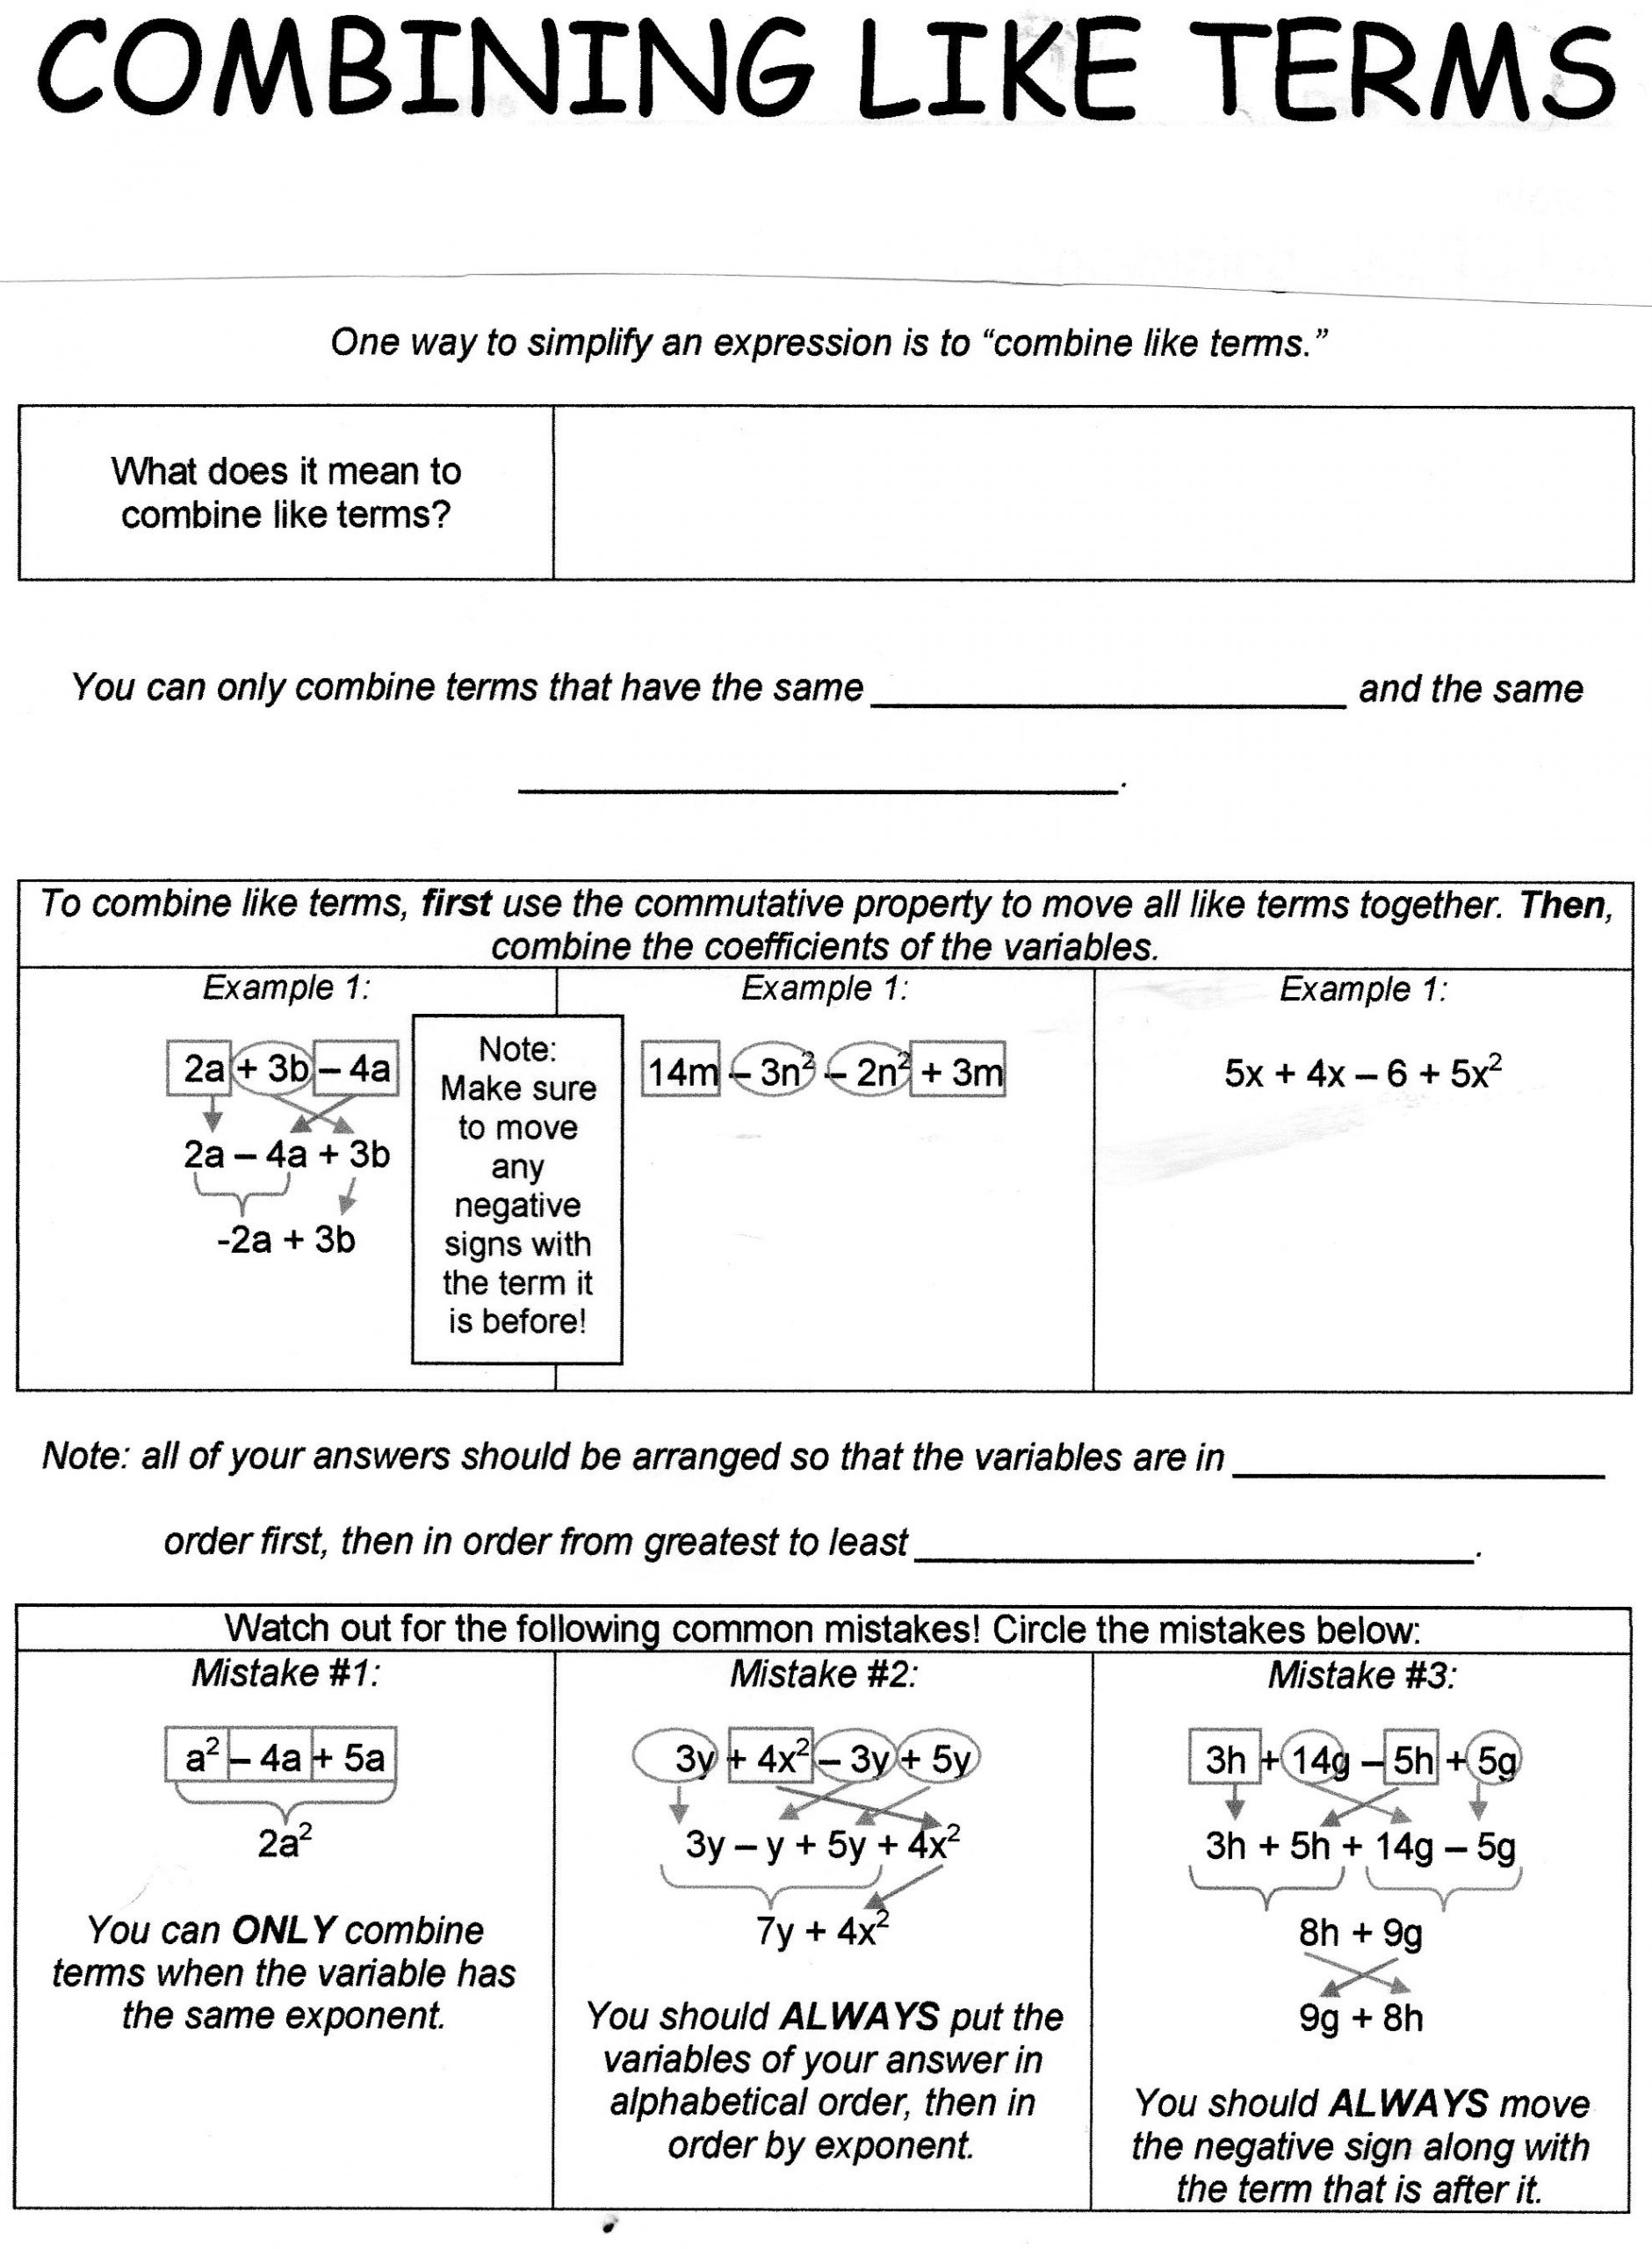 Combining Like Terms Worksheet Answers 33 Bining Like Terms Practice Worksheet Answers